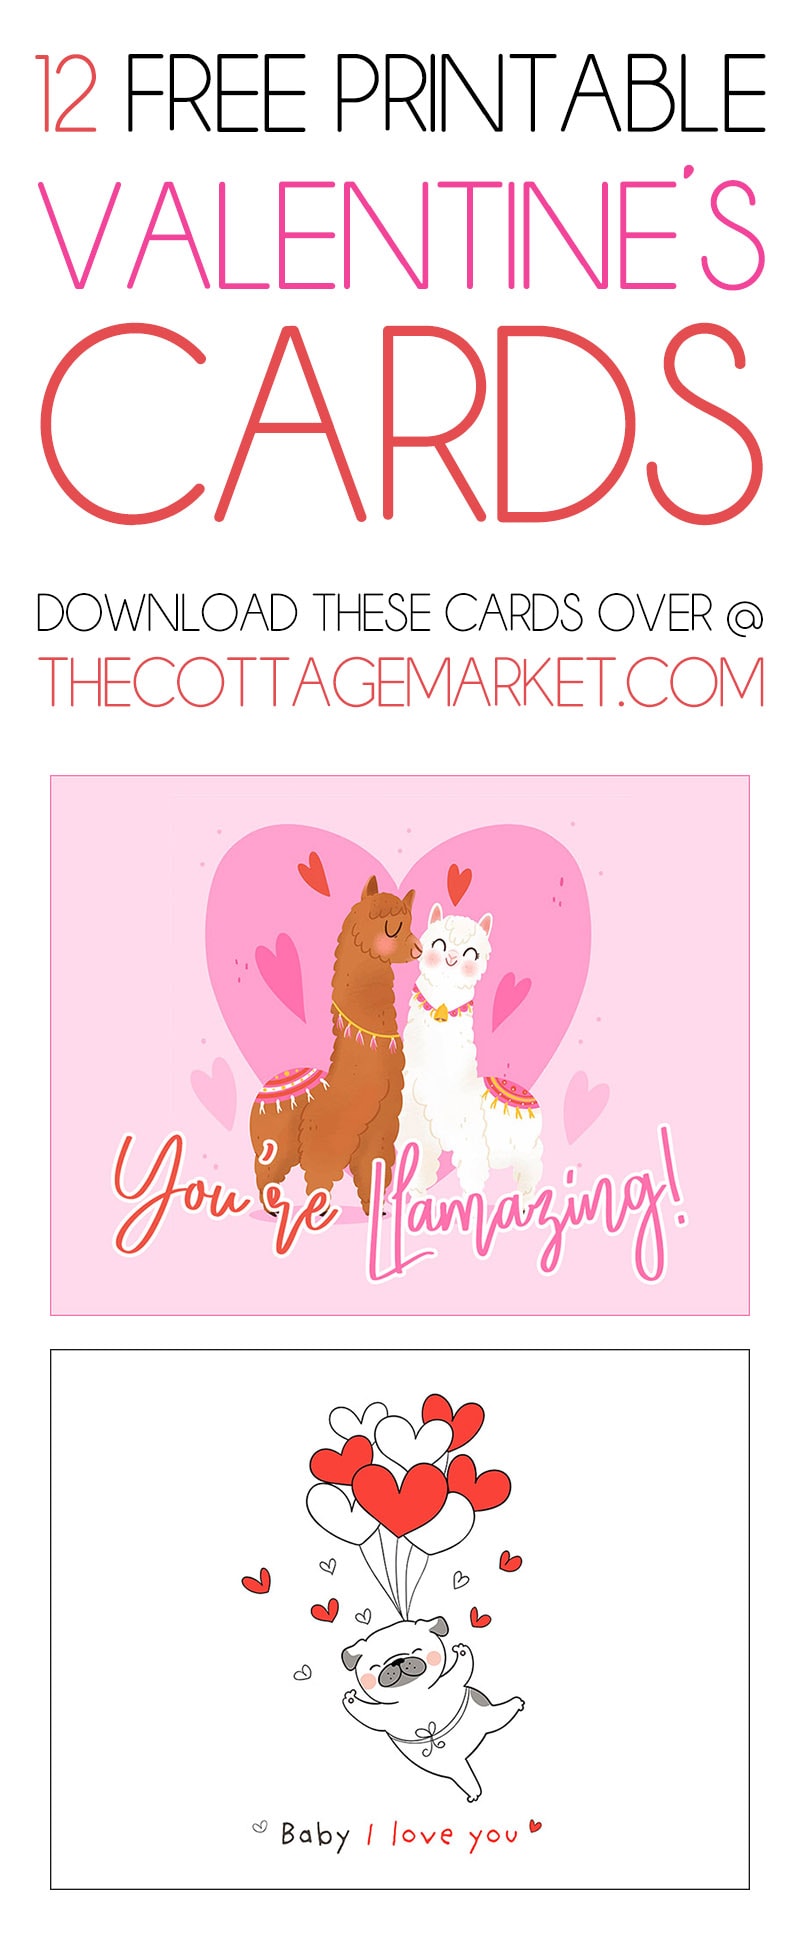 The 12 Free Printable Valentine's Day Cards are just waiting for you to send to loved ones in your life!  Hope they make you smile!